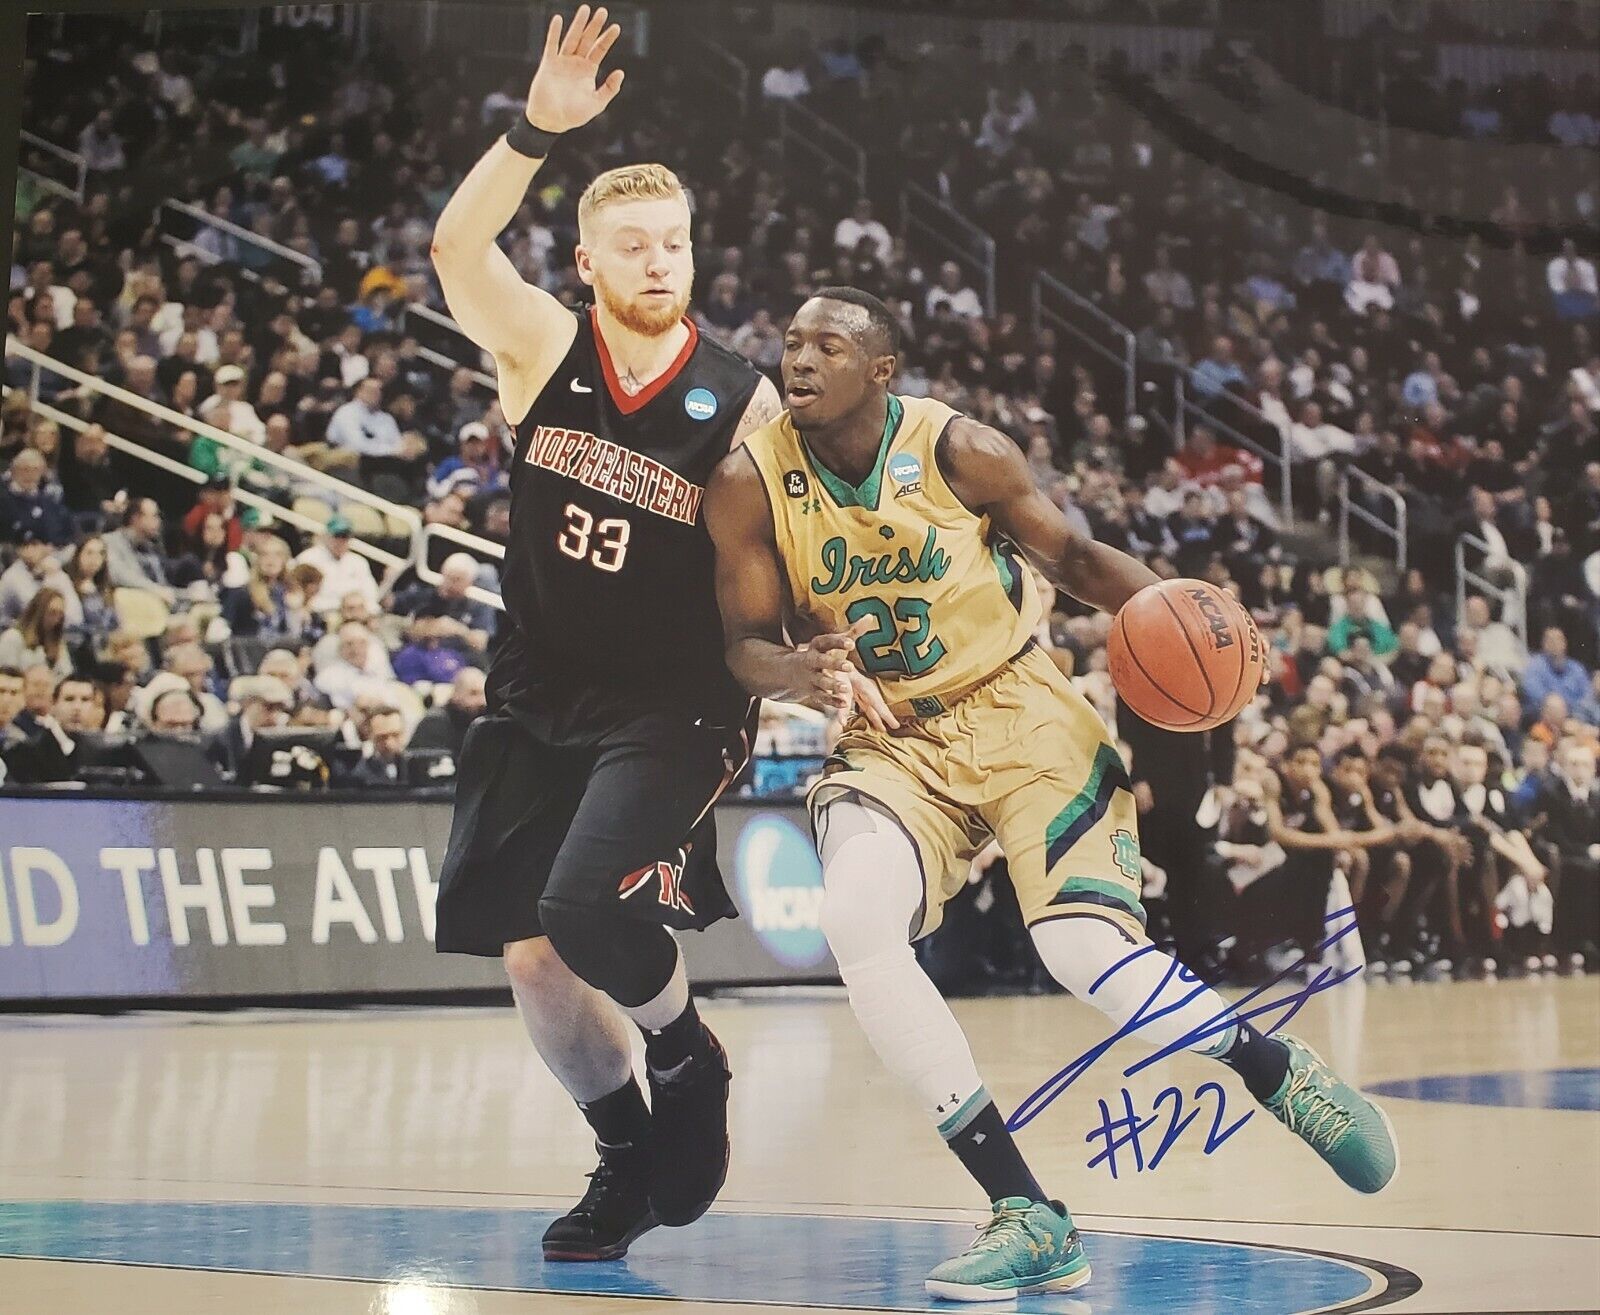 Signed 11X14 JERIAN GRANT University of Notre Dame Autographed Photo Poster painting w/COA